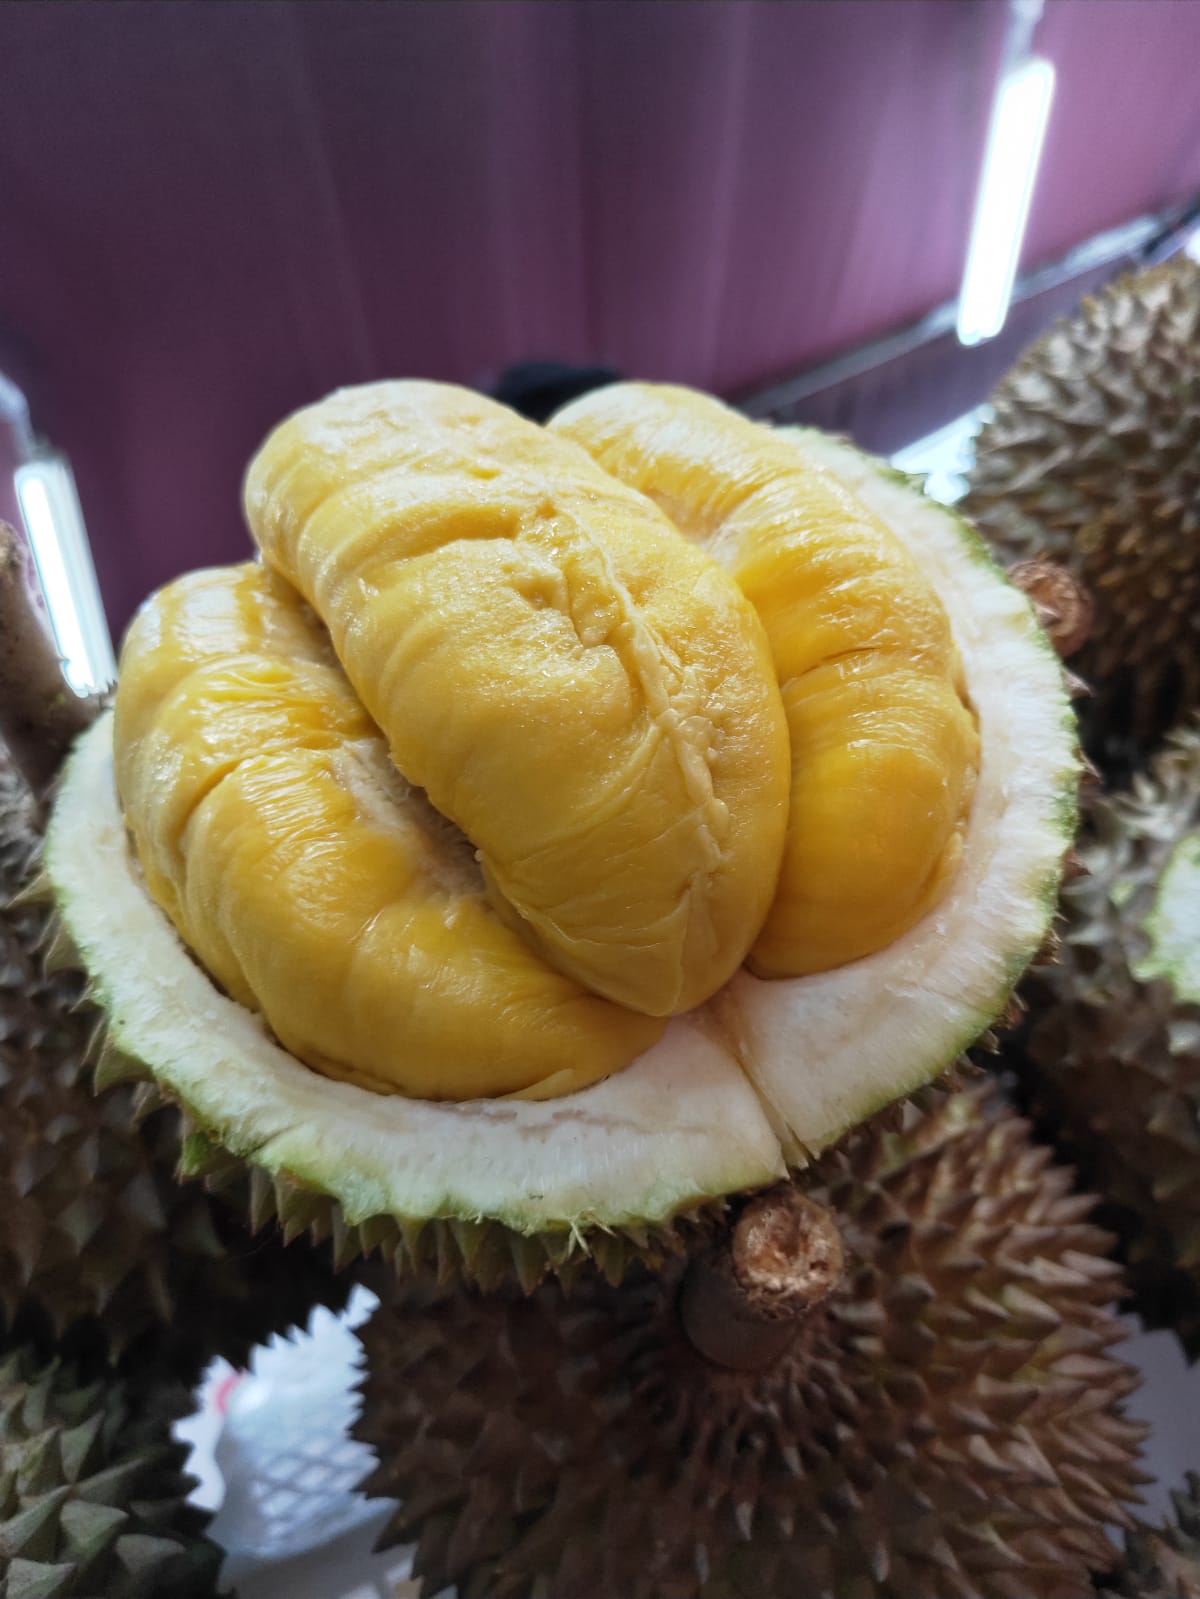 “MAO” Faber Durian Night – Promotions and other offerings for the first-ever Mao Shan Wang Durian experience - Alvinology